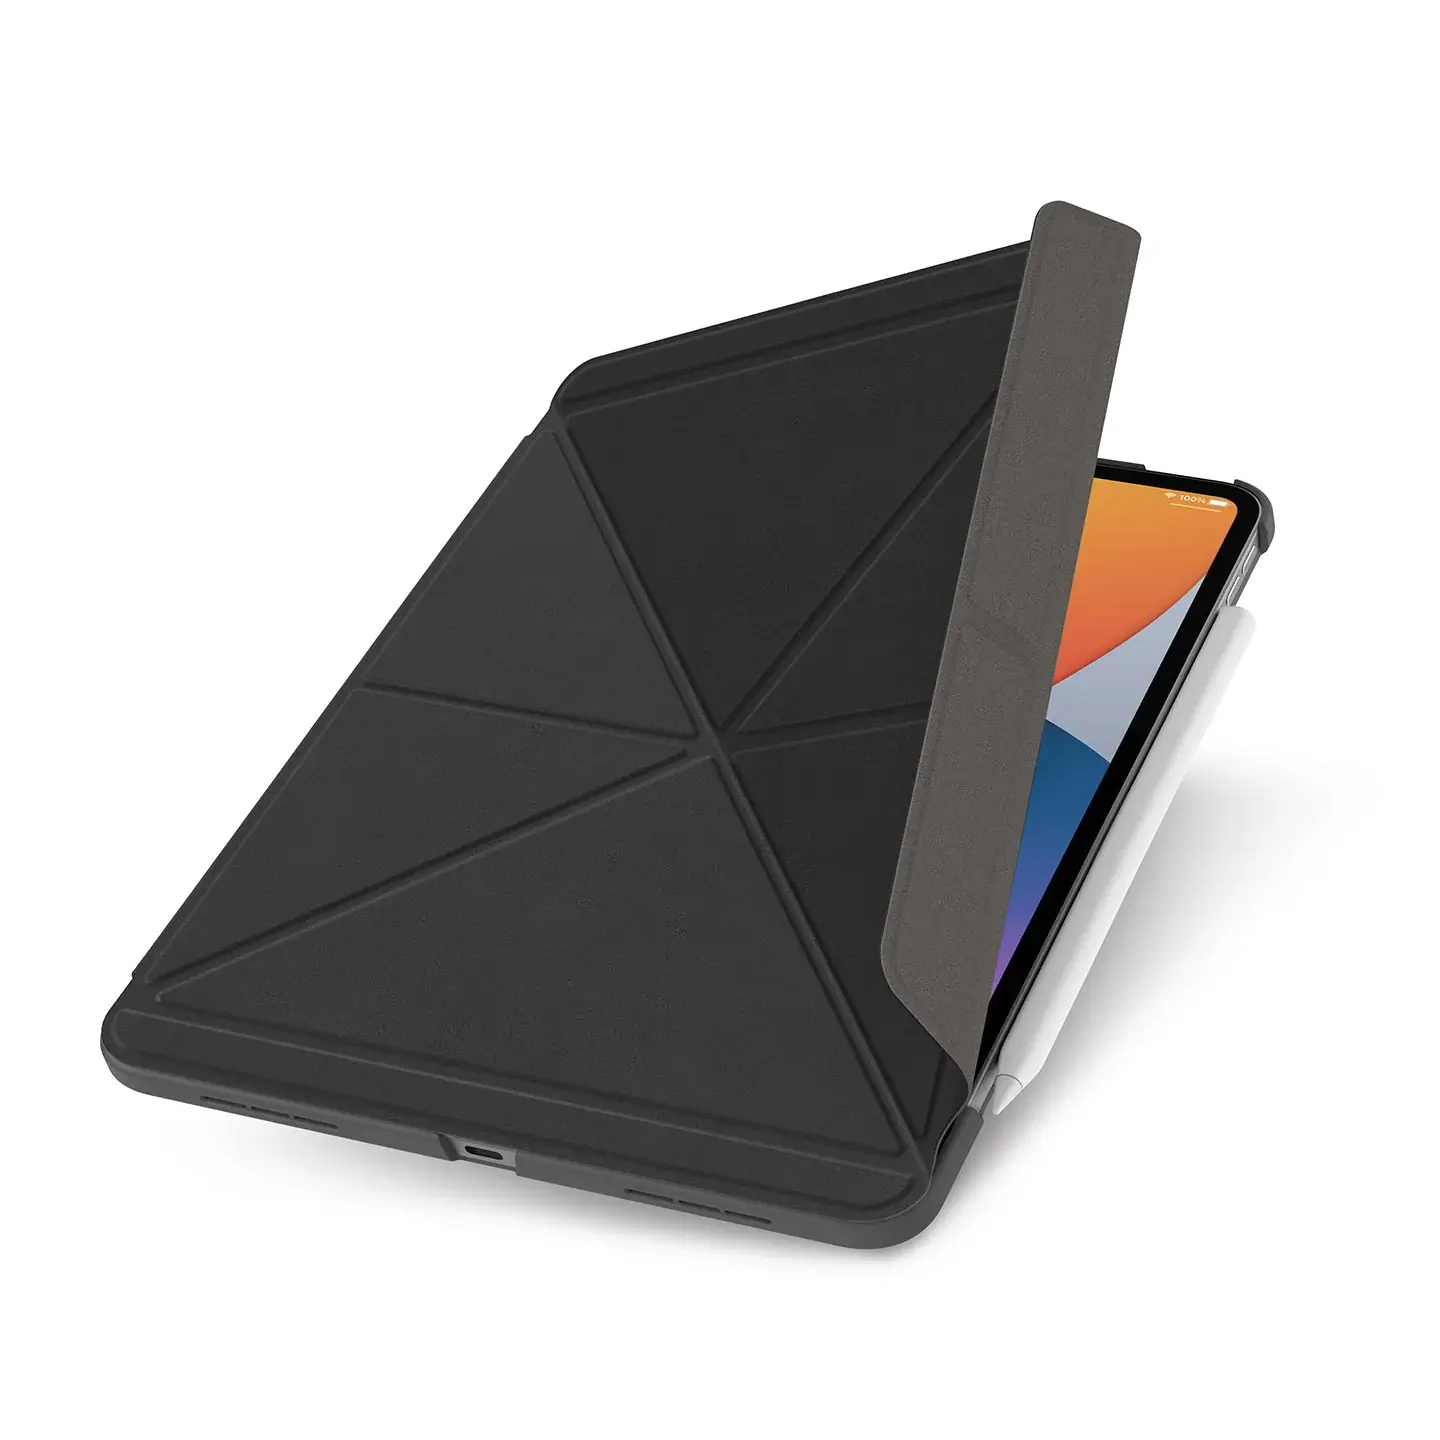 Moshi VersaCover Case with Folding Cover Charcoal Black for iPad Pro 11" (4th/1st Gen) (99MO231601)